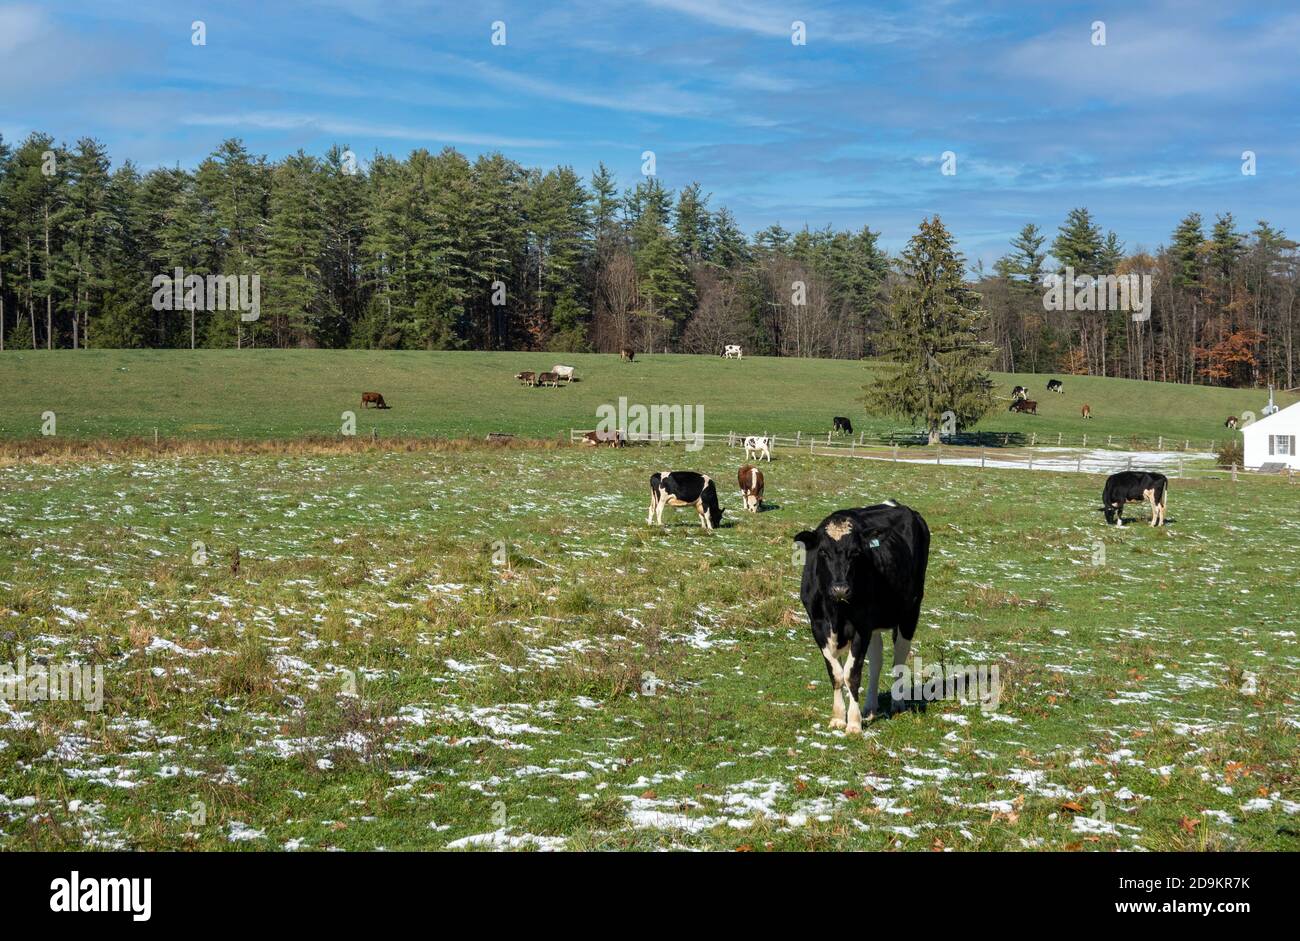 Walpole, New Hampshire, USA. 2020.  Cattle grazing on a New Hampshire farm in late autumn. A sunny day with a litght covering of snow on the field. Stock Photo